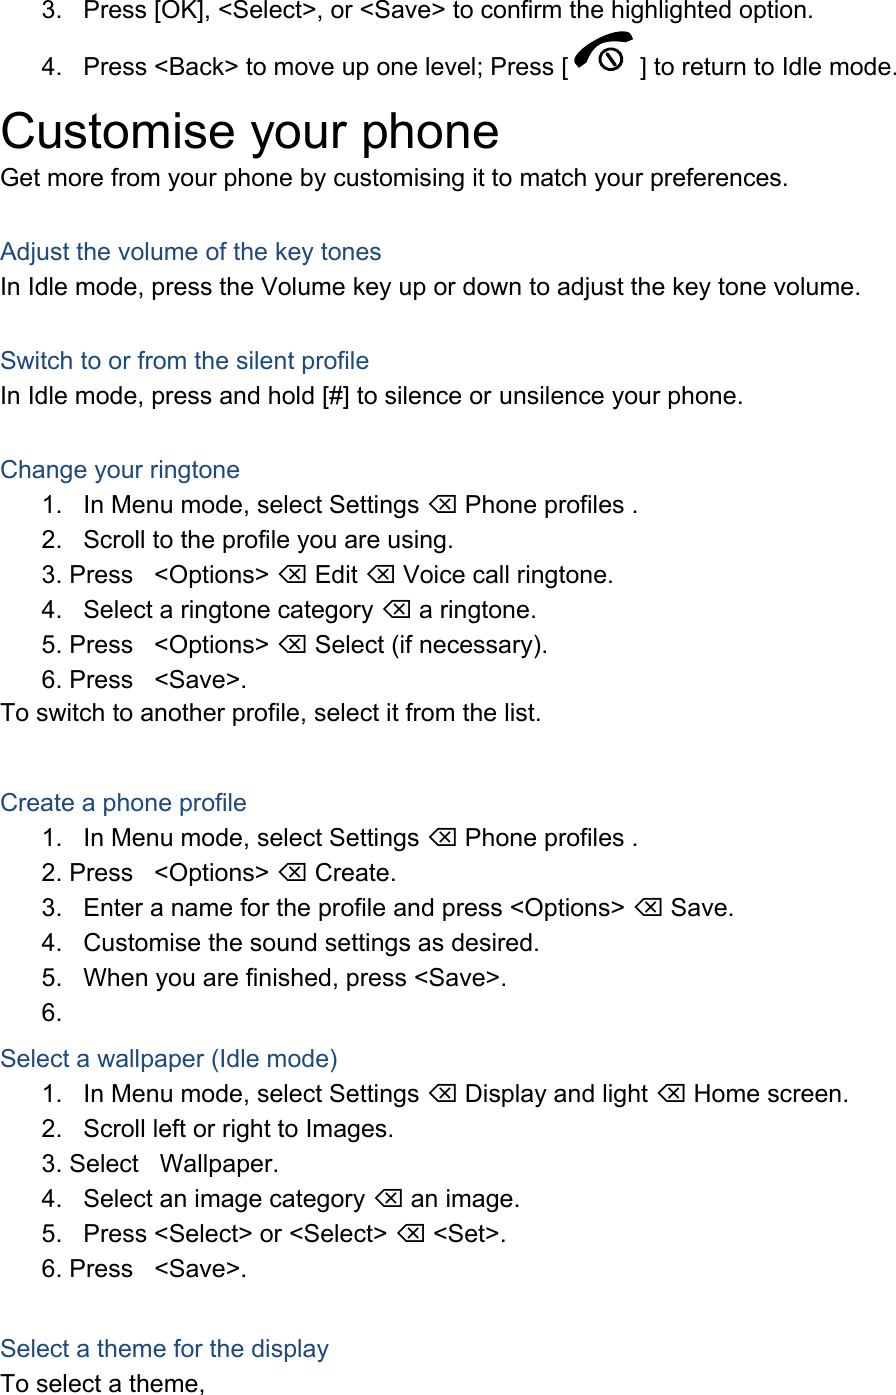 3.  Press [OK], &lt;Select&gt;, or &lt;Save&gt; to confirm the highlighted option. 4.  Press &lt;Back&gt; to move up one level; Press [ ] to return to Idle mode. Customise your phone Get more from your phone by customising it to match your preferences.  Adjust the volume of the key tones In Idle mode, press the Volume key up or down to adjust the key tone volume.  Switch to or from the silent profile In Idle mode, press and hold [#] to silence or unsilence your phone.  Change your ringtone 1.  In Menu mode, select Settings  Phone profiles . 2.  Scroll to the profile you are using. 3. Press &lt;Options&gt;  Edit  Voice call ringtone. 4.  Select a ringtone category  a ringtone. 5. Press &lt;Options&gt;  Select (if necessary). 6. Press &lt;Save&gt;. To switch to another profile, select it from the list.  Create a phone profile 1.  In Menu mode, select Settings  Phone profiles . 2. Press &lt;Options&gt;  Create. 3.  Enter a name for the profile and press &lt;Options&gt;  Save. 4.  Customise the sound settings as desired. 5.  When you are finished, press &lt;Save&gt;. 6.  Select a wallpaper (Idle mode) 1.  In Menu mode, select Settings  Display and light  Home screen. 2.  Scroll left or right to Images. 3. Select Wallpaper. 4.  Select an image category  an image. 5.  Press &lt;Select&gt; or &lt;Select&gt;  &lt;Set&gt;. 6. Press &lt;Save&gt;.  Select a theme for the display To select a theme, 